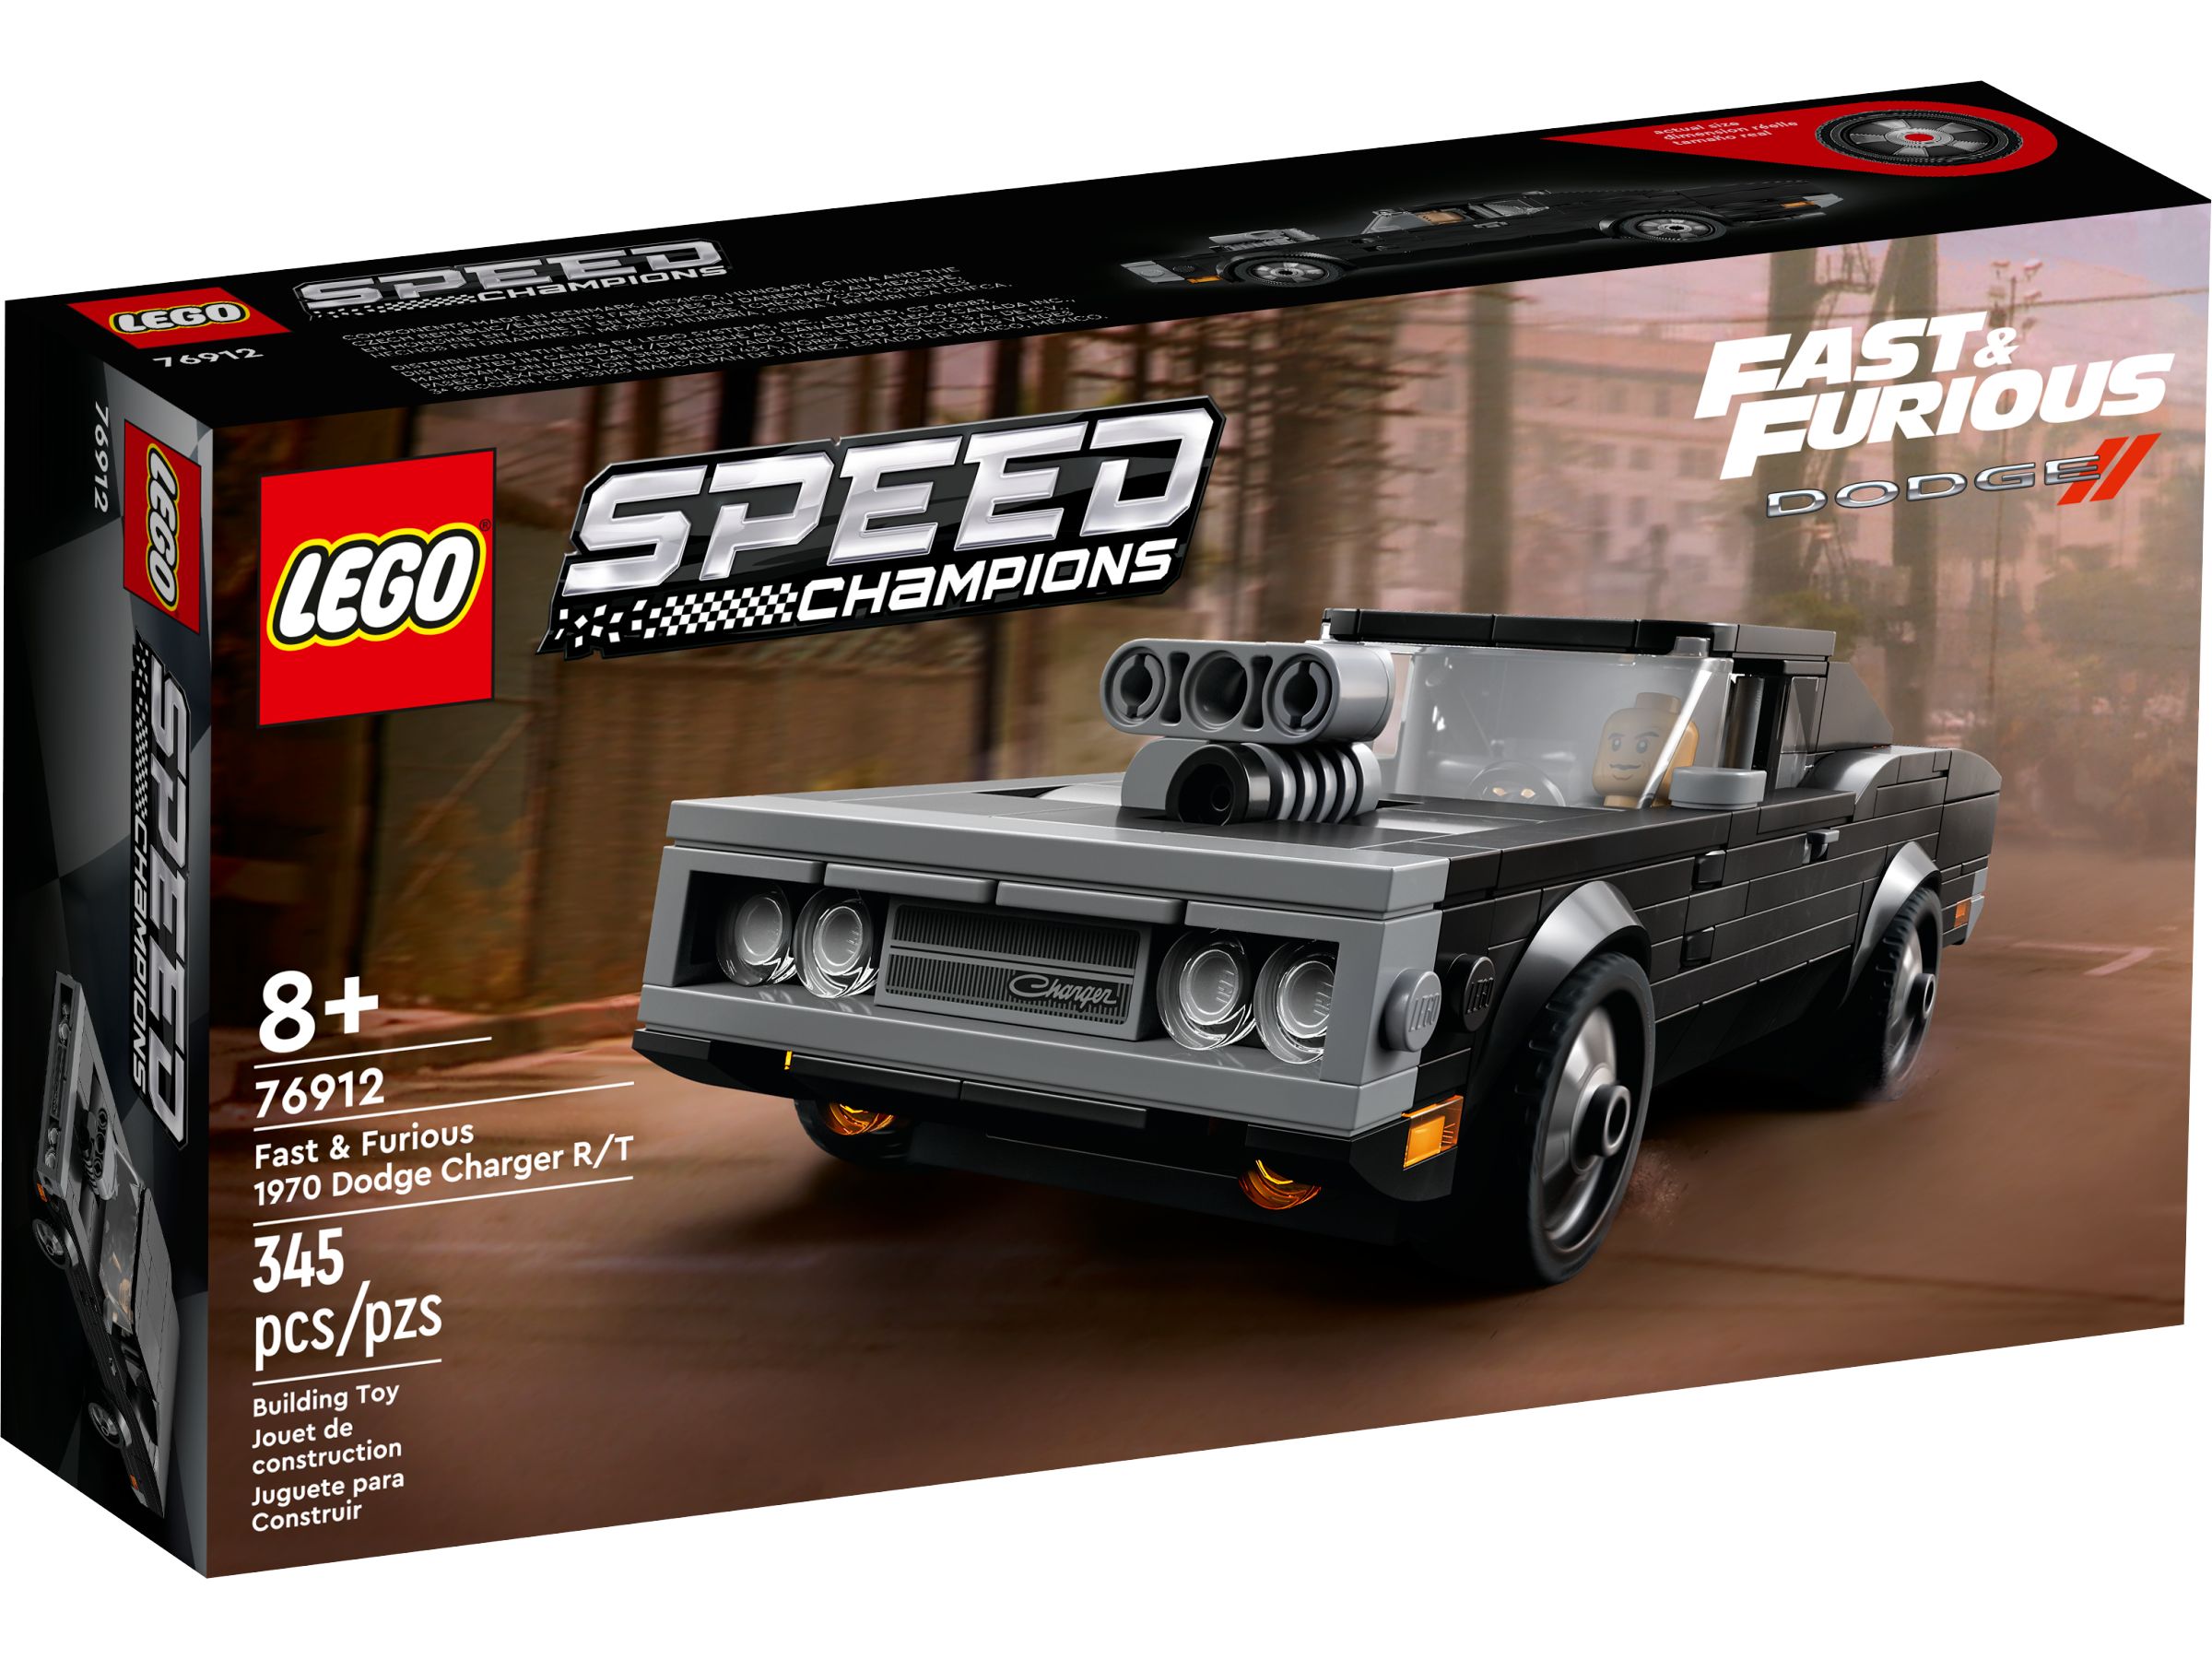 LEGO Speed Champions 76912 Fast & Furious 1970 Dodge Charger R/T LEGO_76912_alt1.jpg